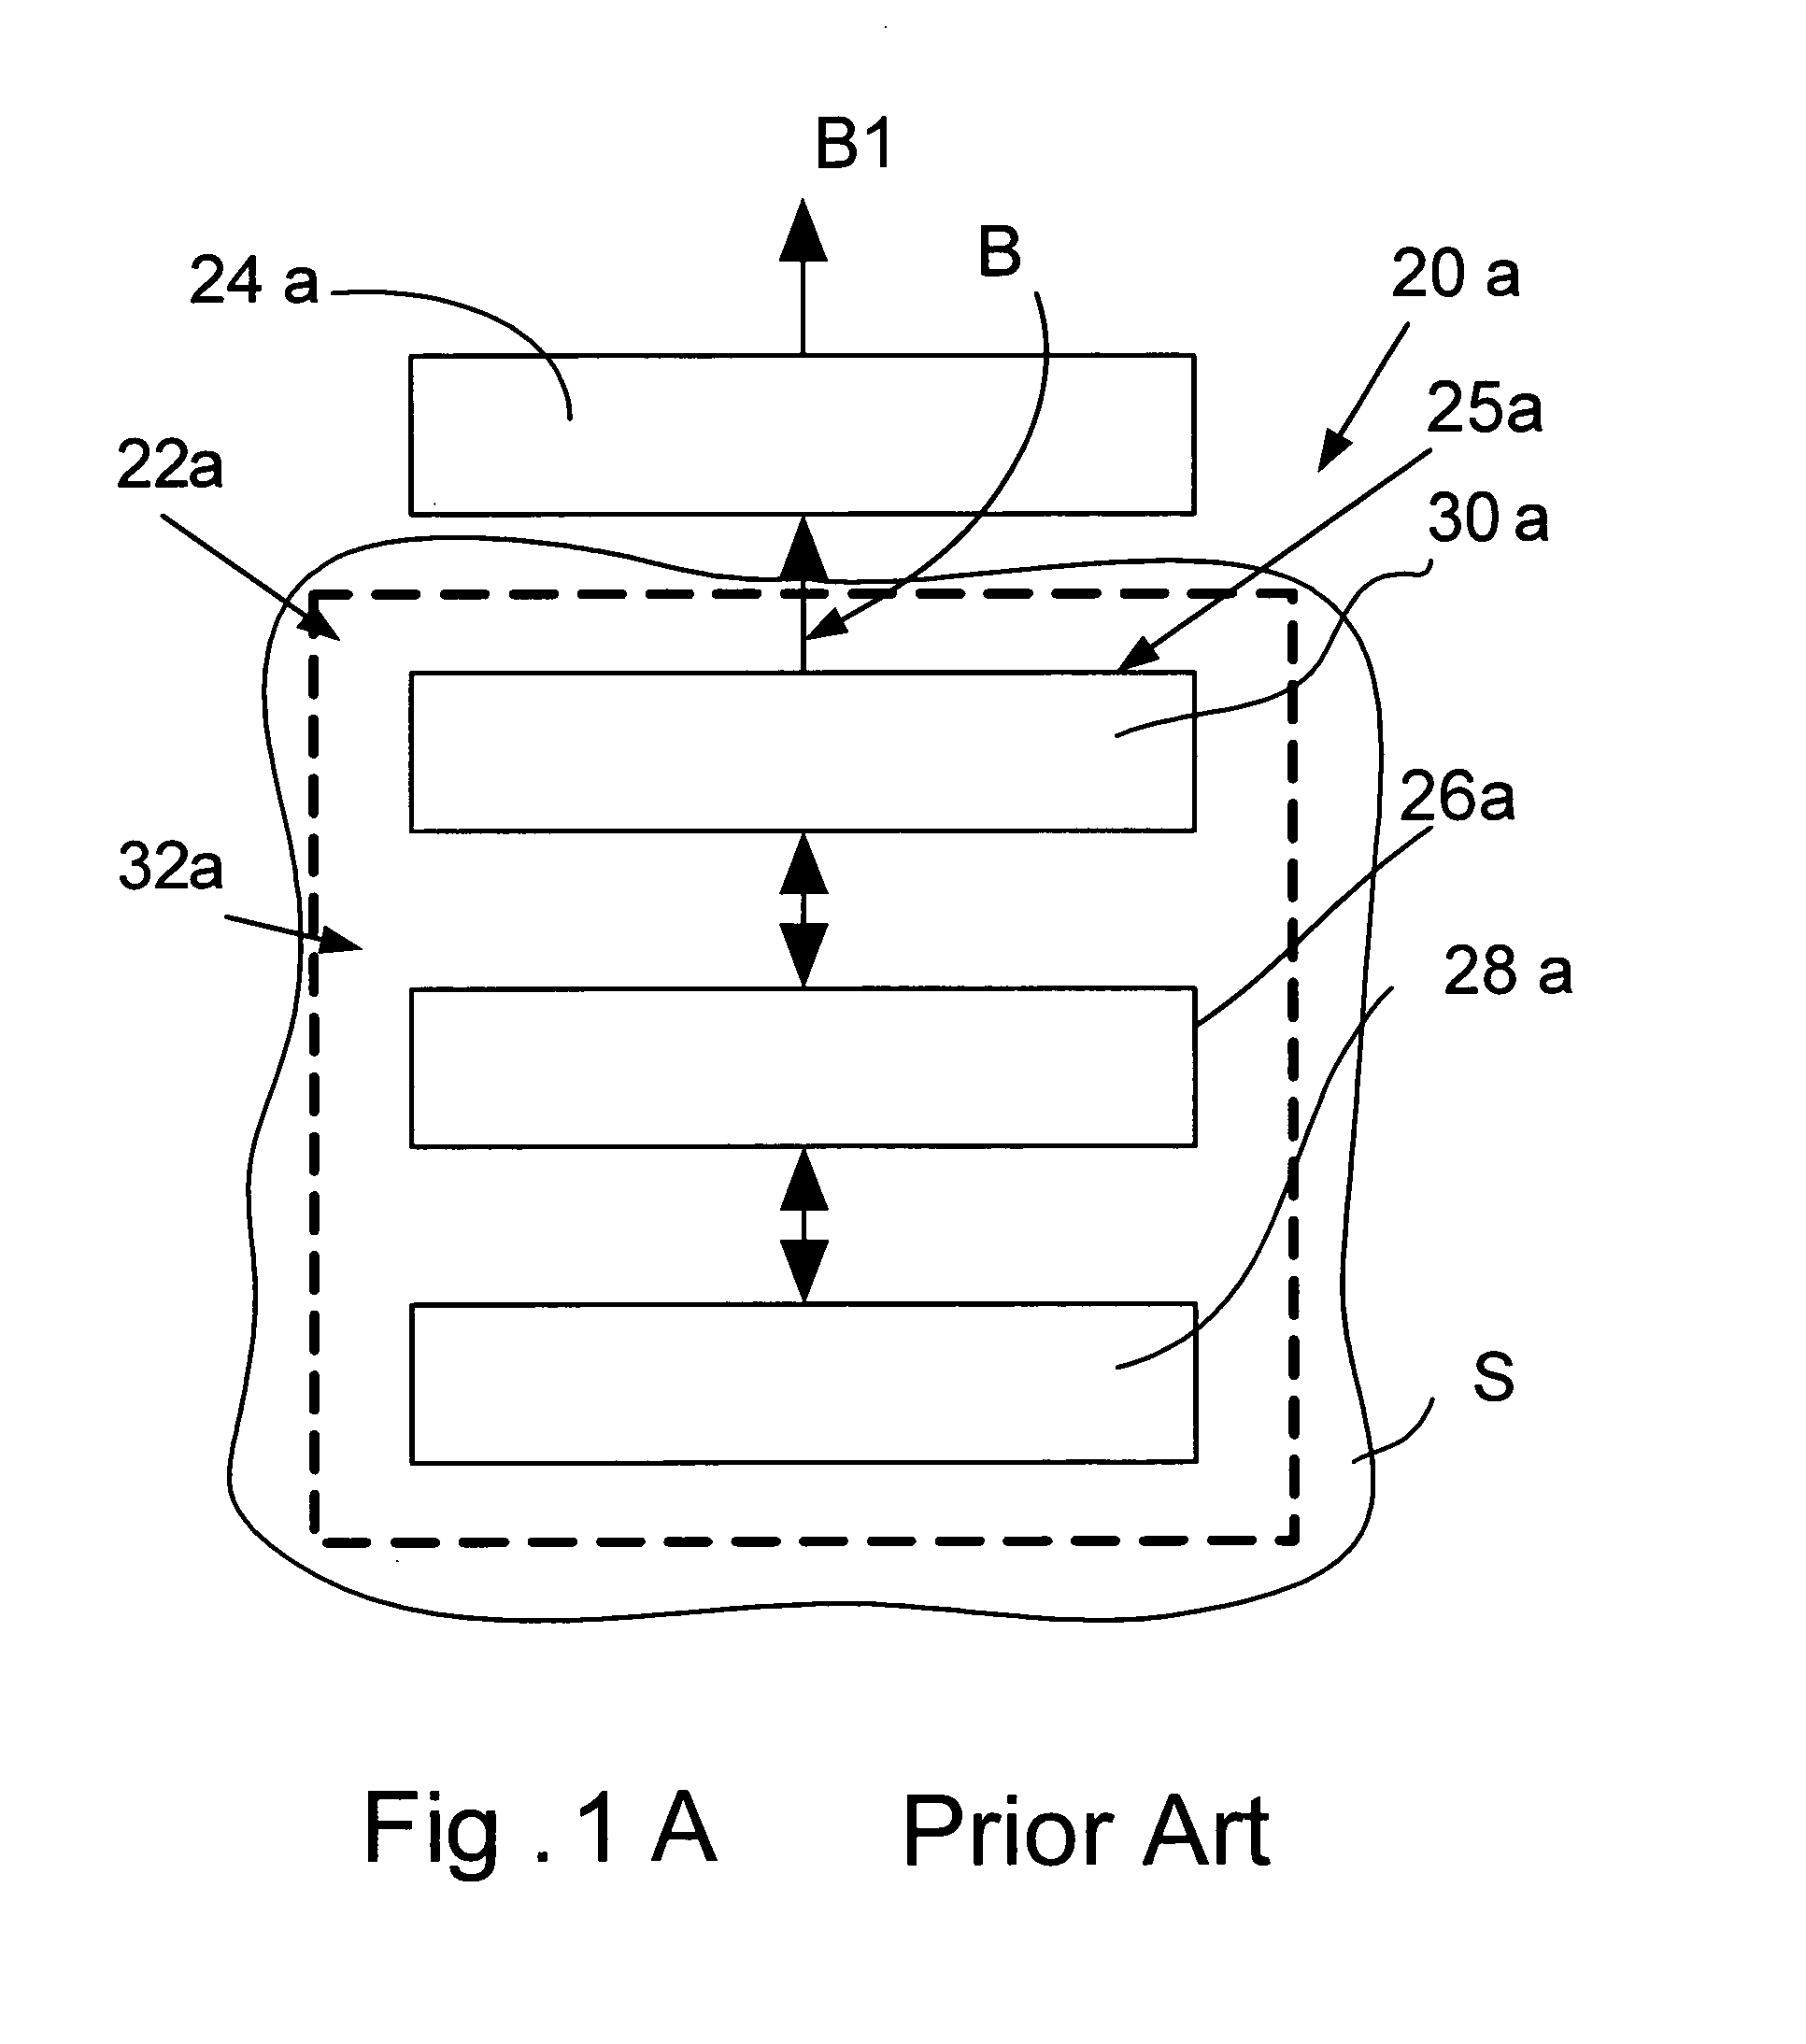 Light-enhancing device and method based on use of an optically active lasing medium in combination with digital planar holography